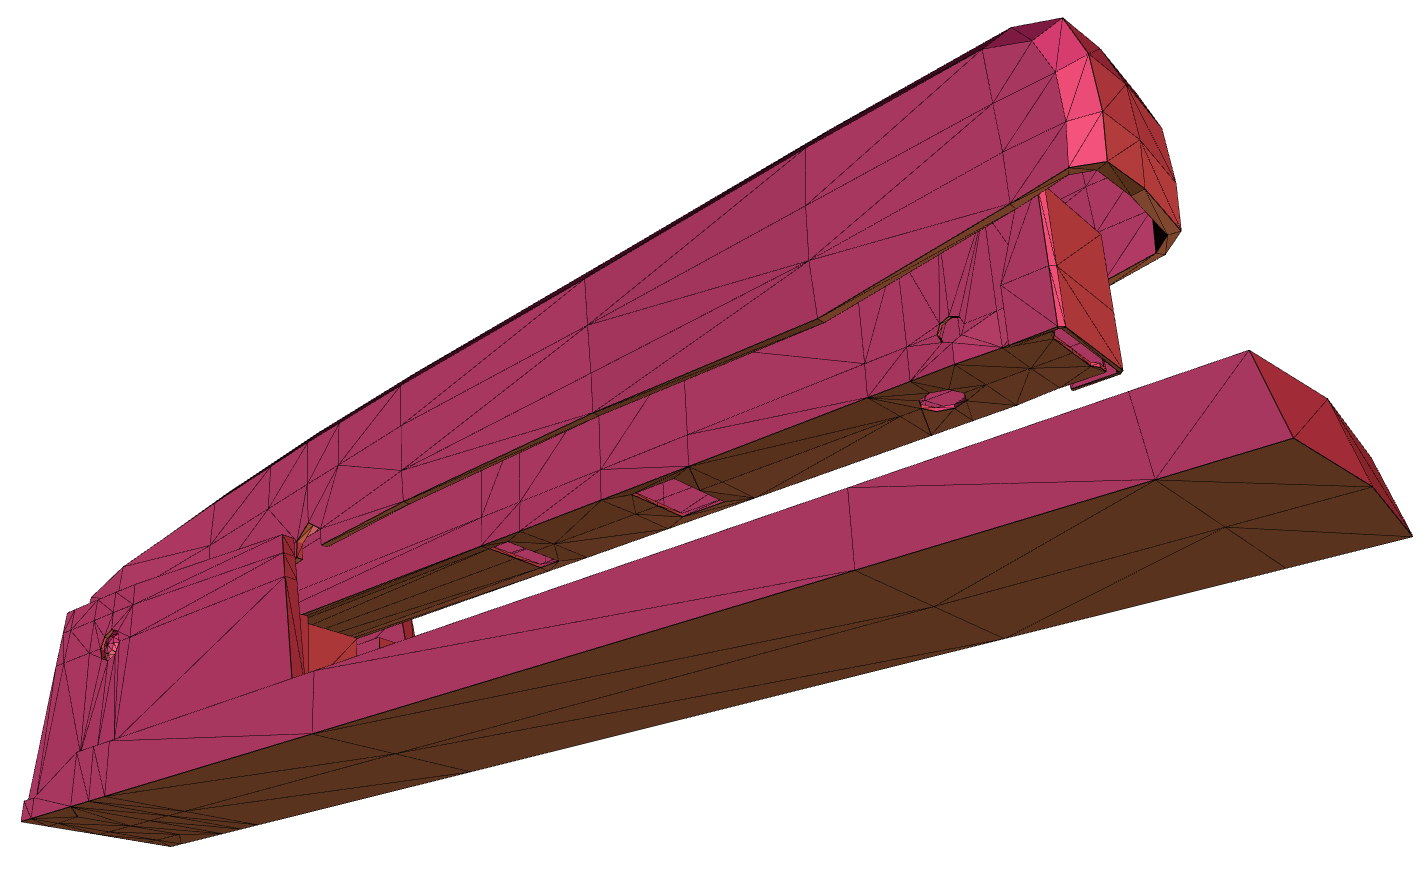 3D Model of a Stapler For Drawing Reference